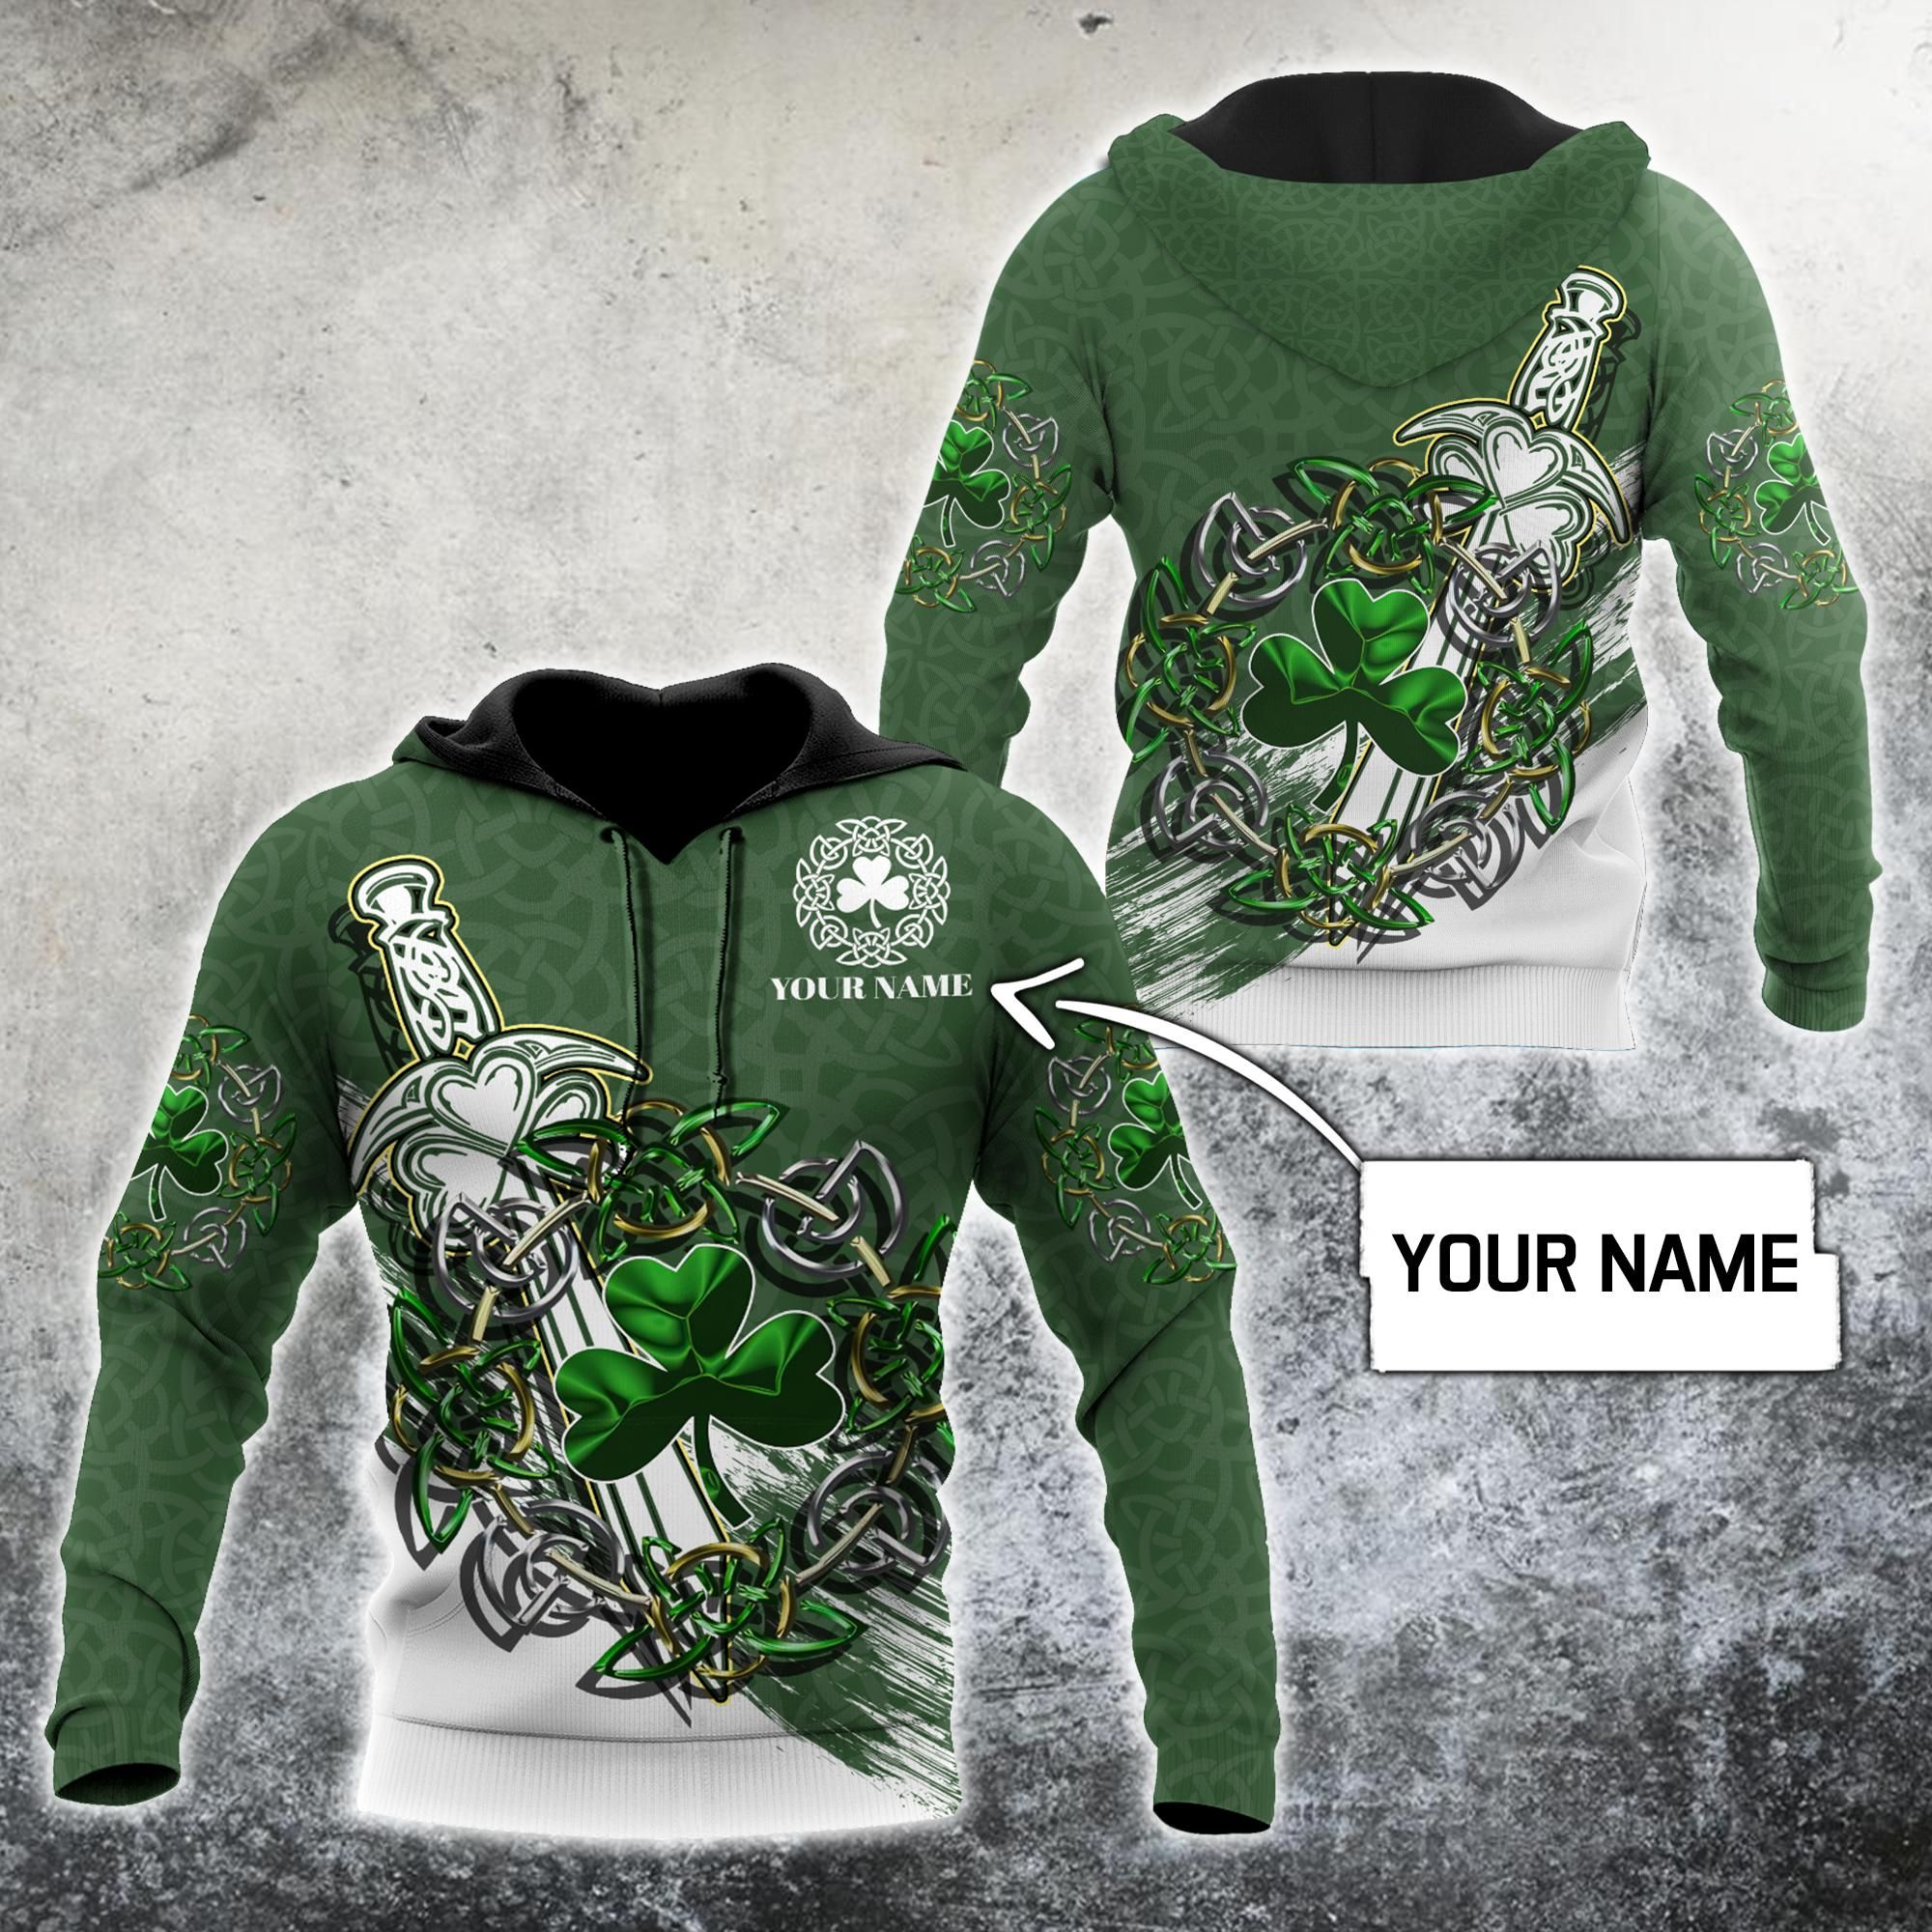 Customize Name Irish In My Heart Hoodie For Men And Women Mh26012106